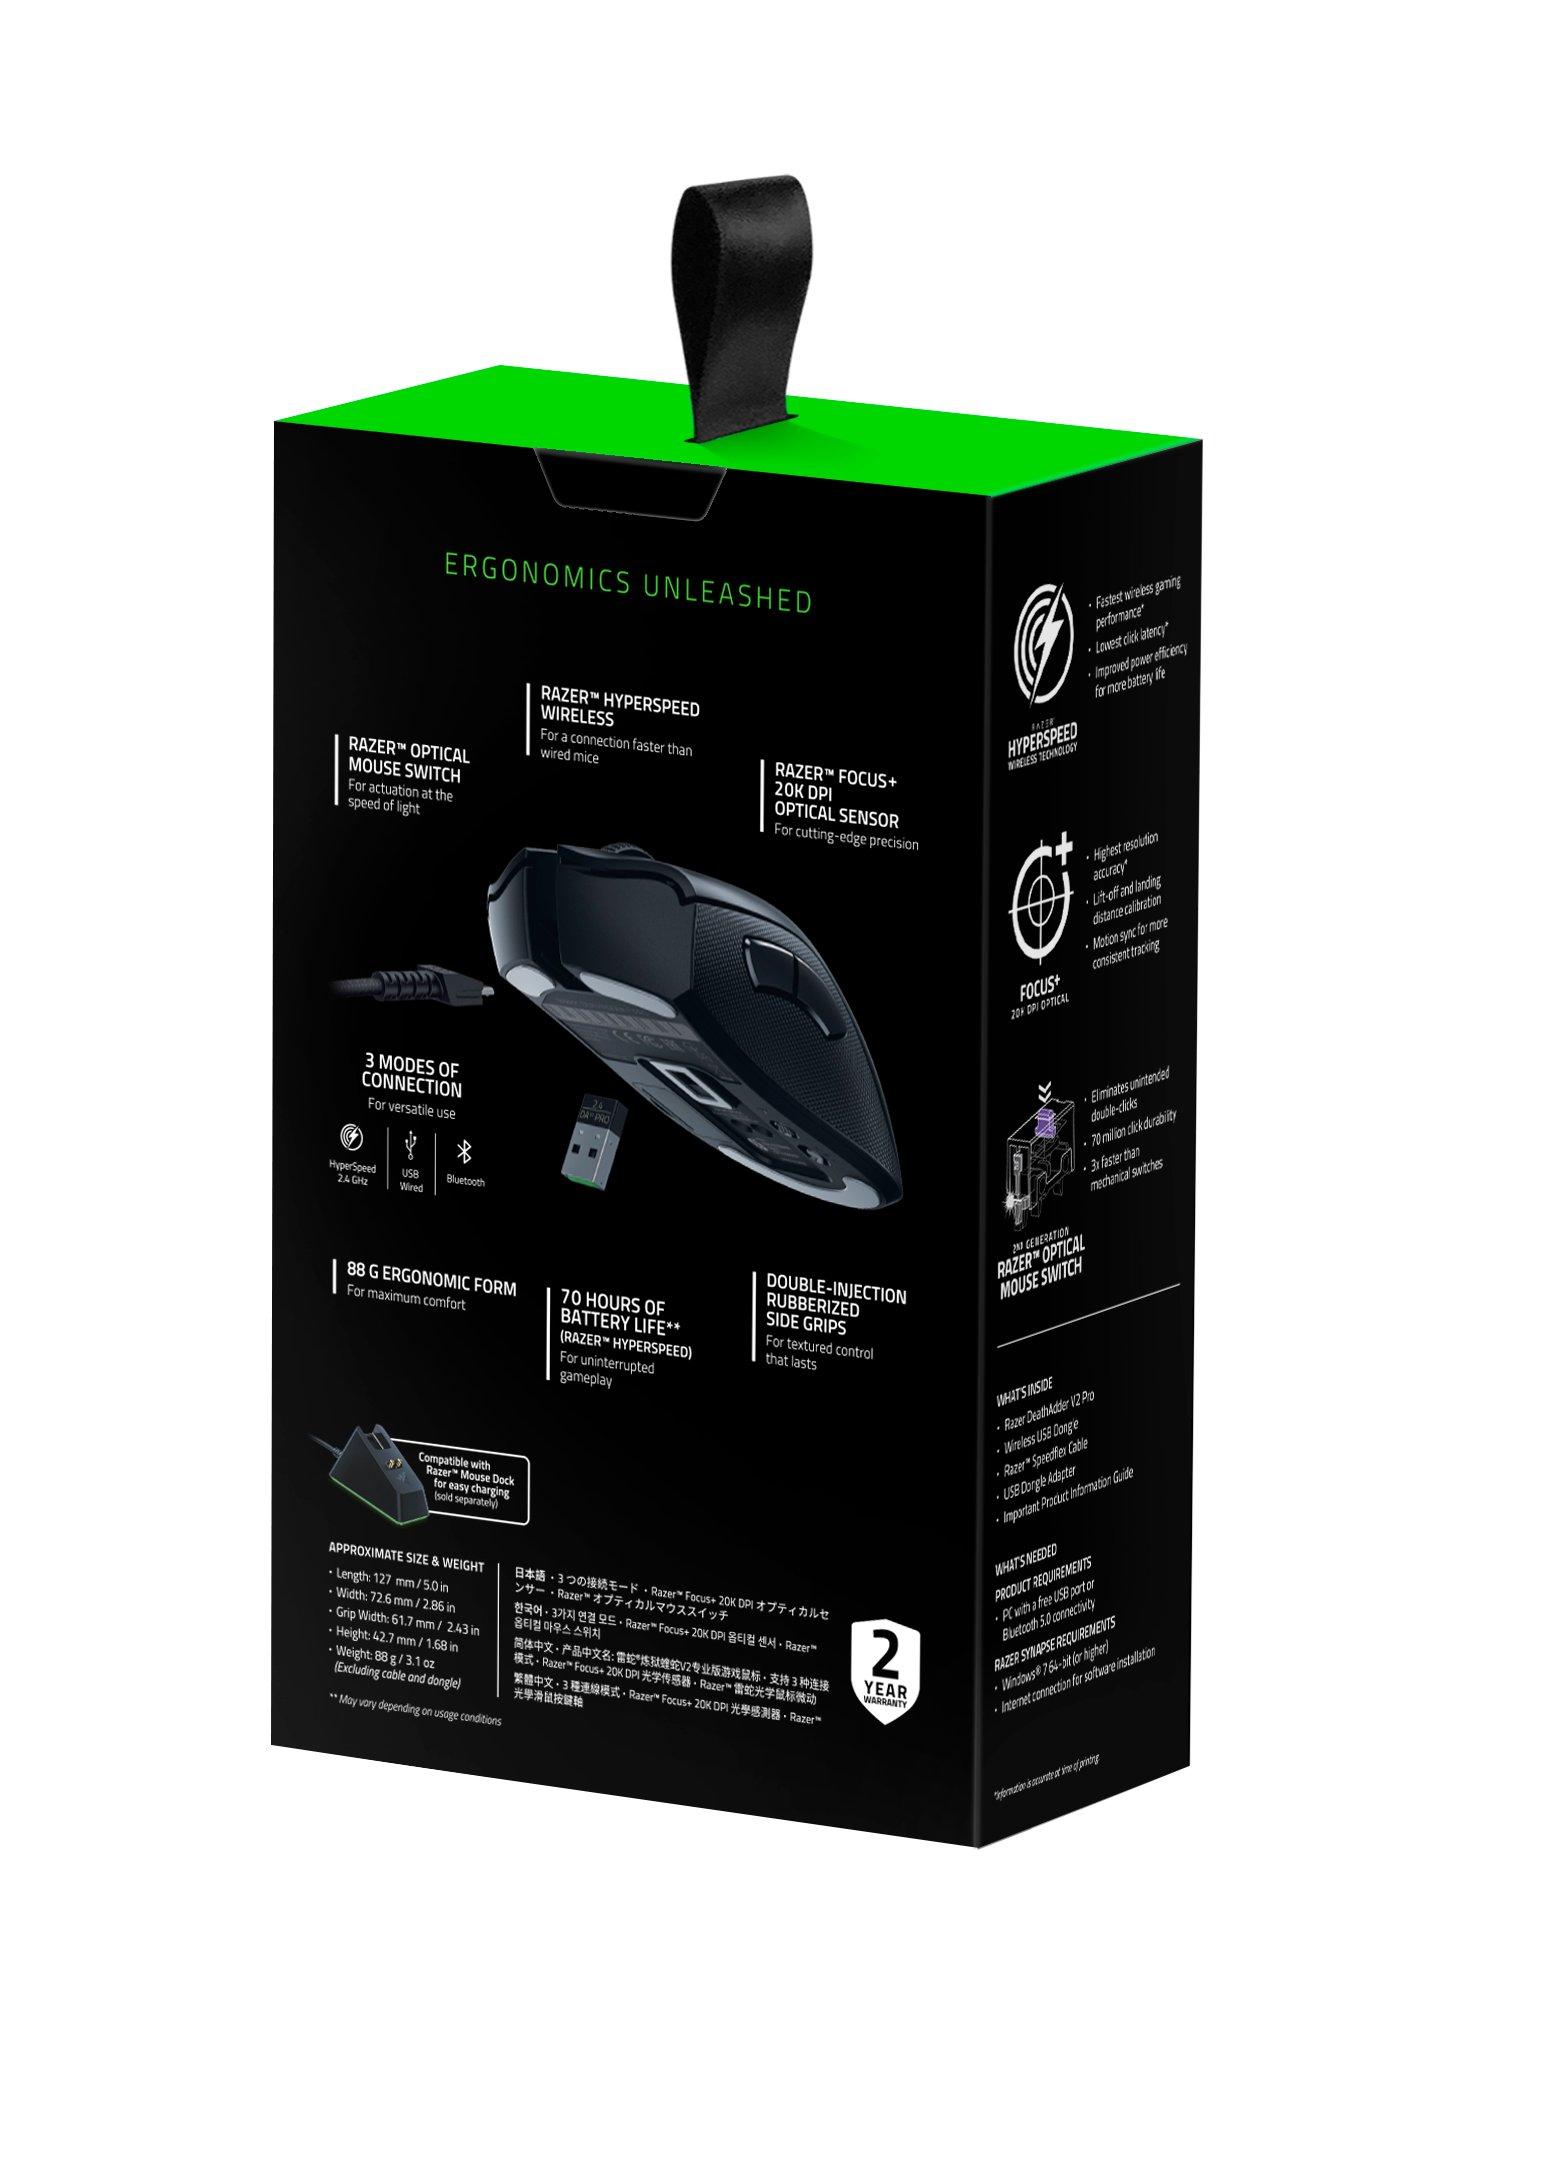 DeathAdder V2 Pro Wireless Gaming Mouse | PC | GameStop